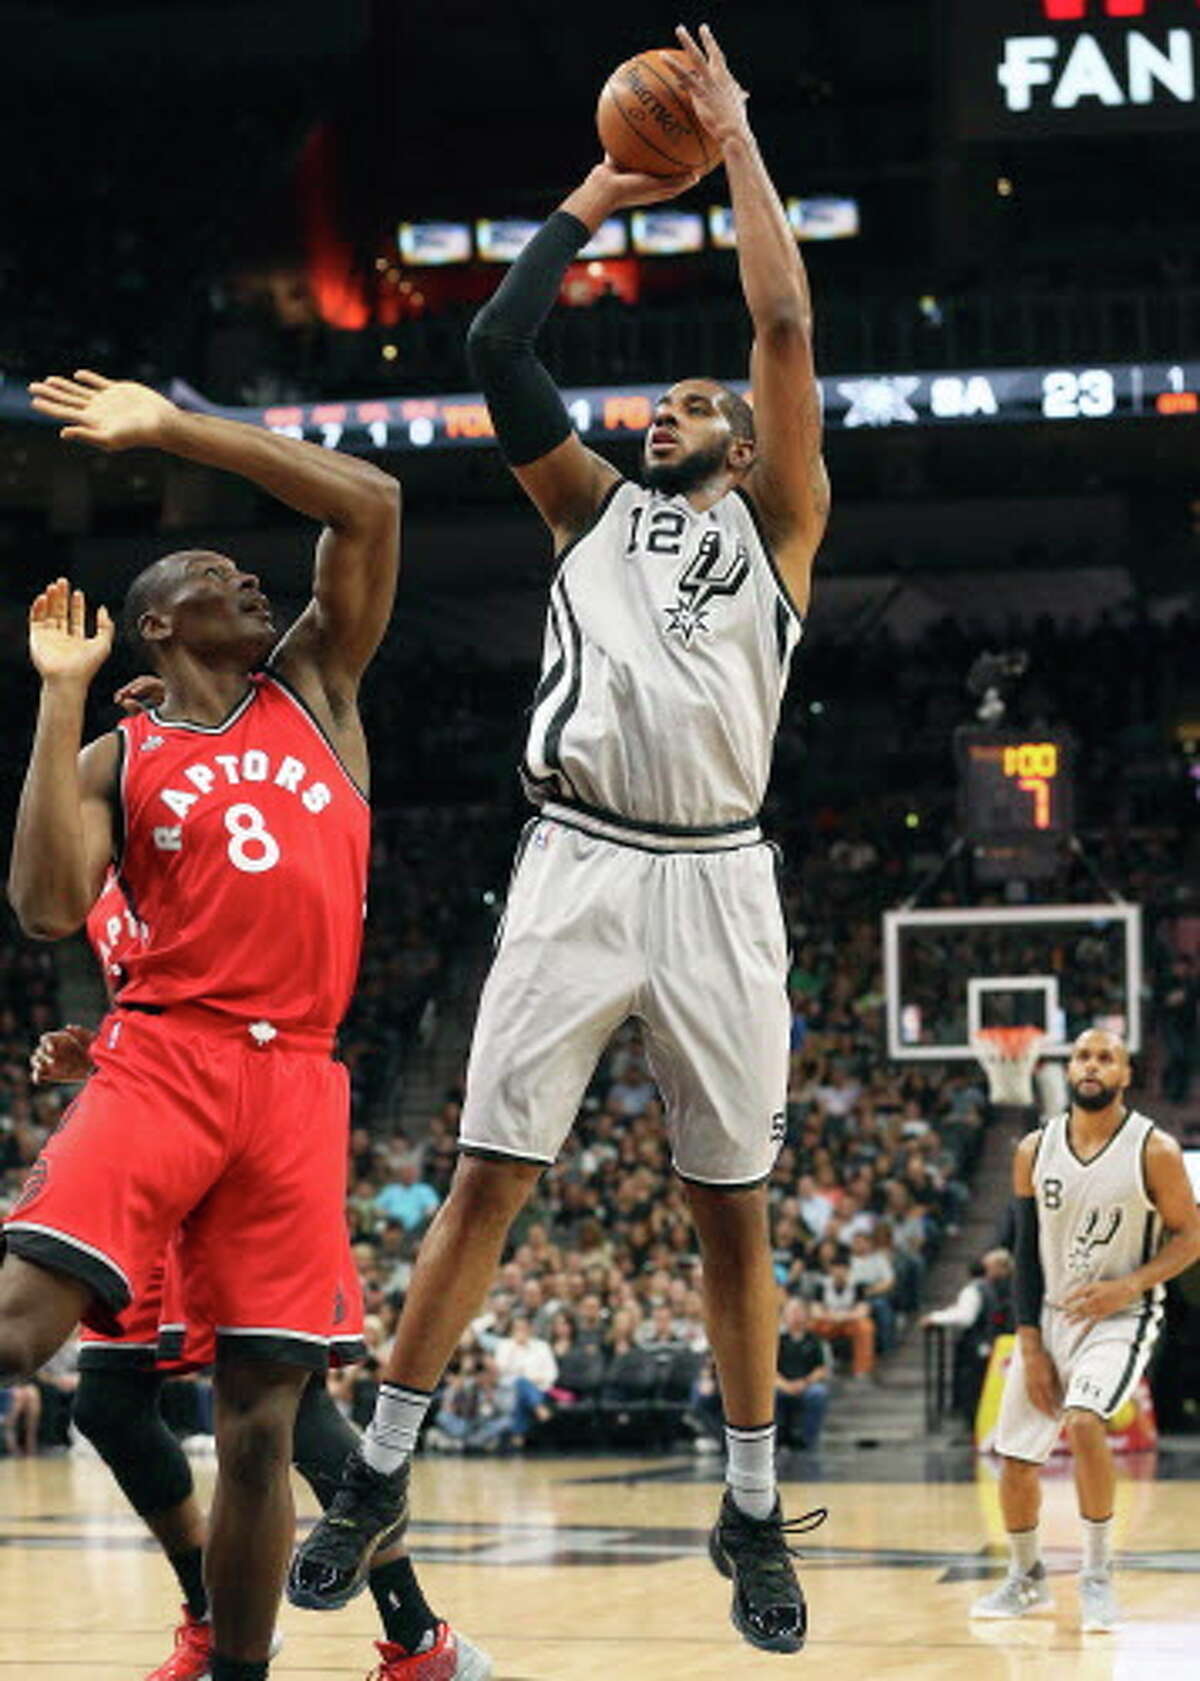 LaMarcus Aldridge pumps another shot over Bismack Biyombo as the Spurs play Toronto at the AT&T Center on April 1, 2016.